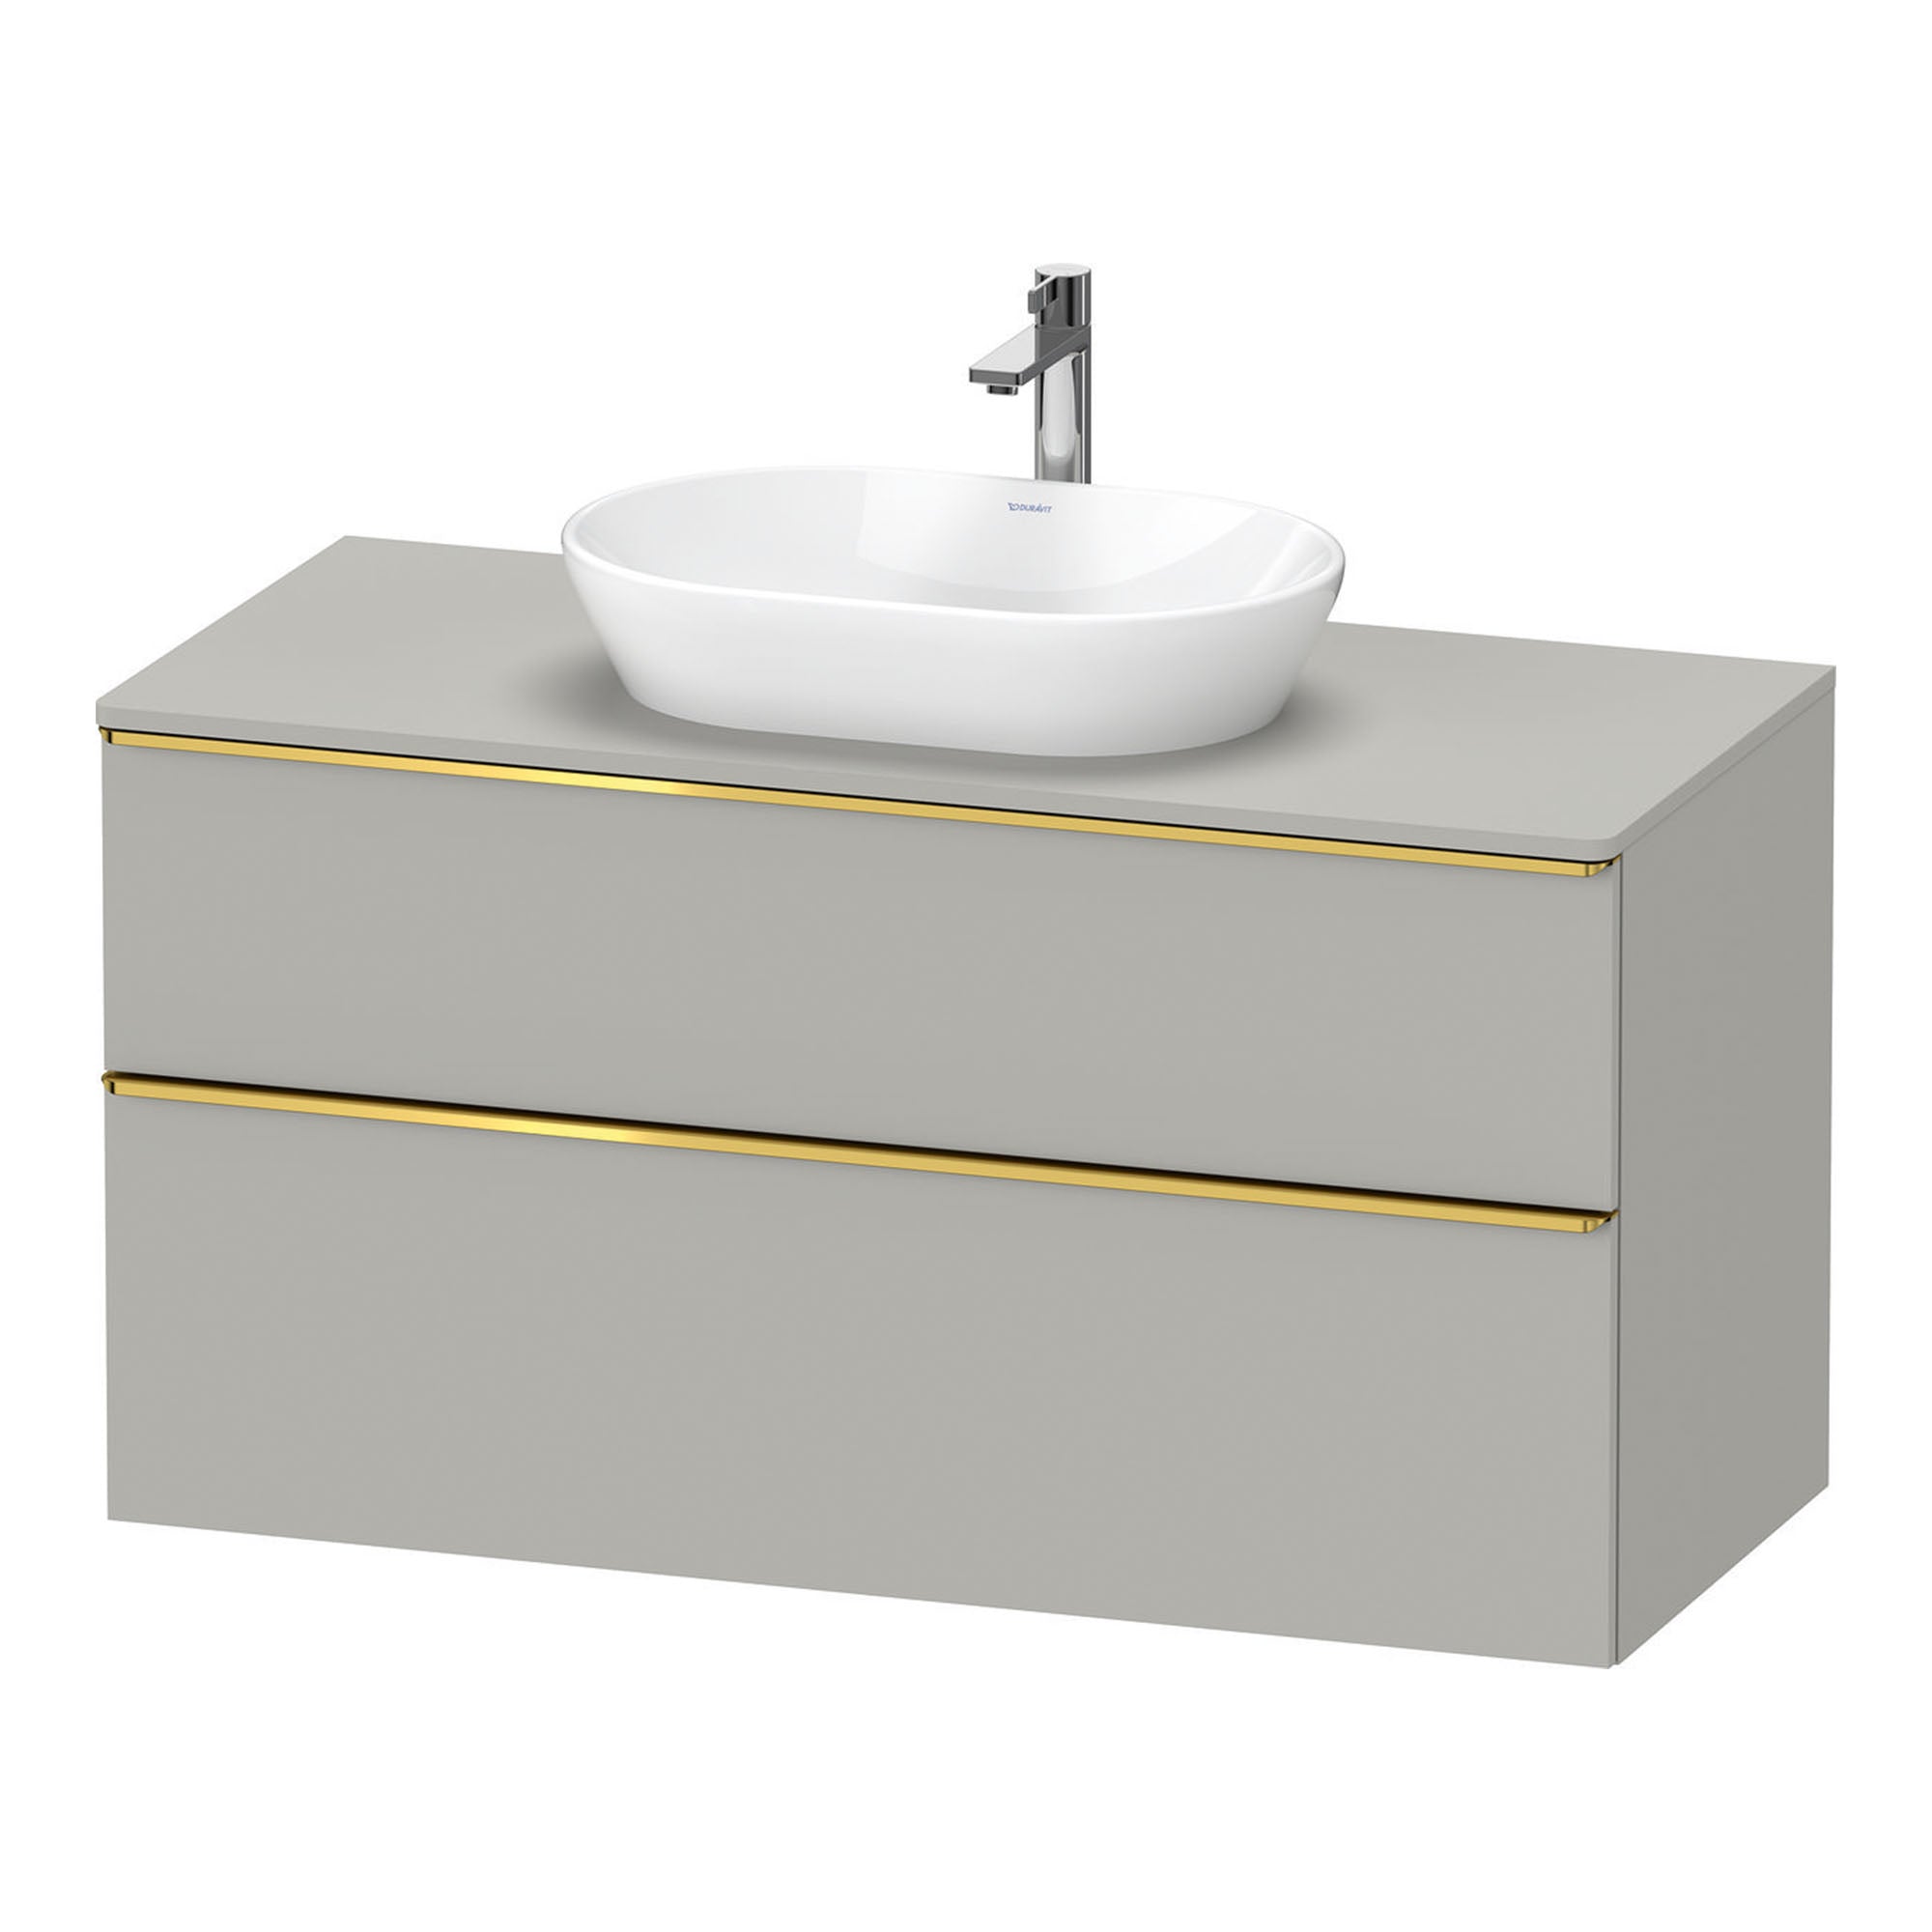 duravit d-neo 1200 wall mounted vanity unit with worktop concrete grey gold handles